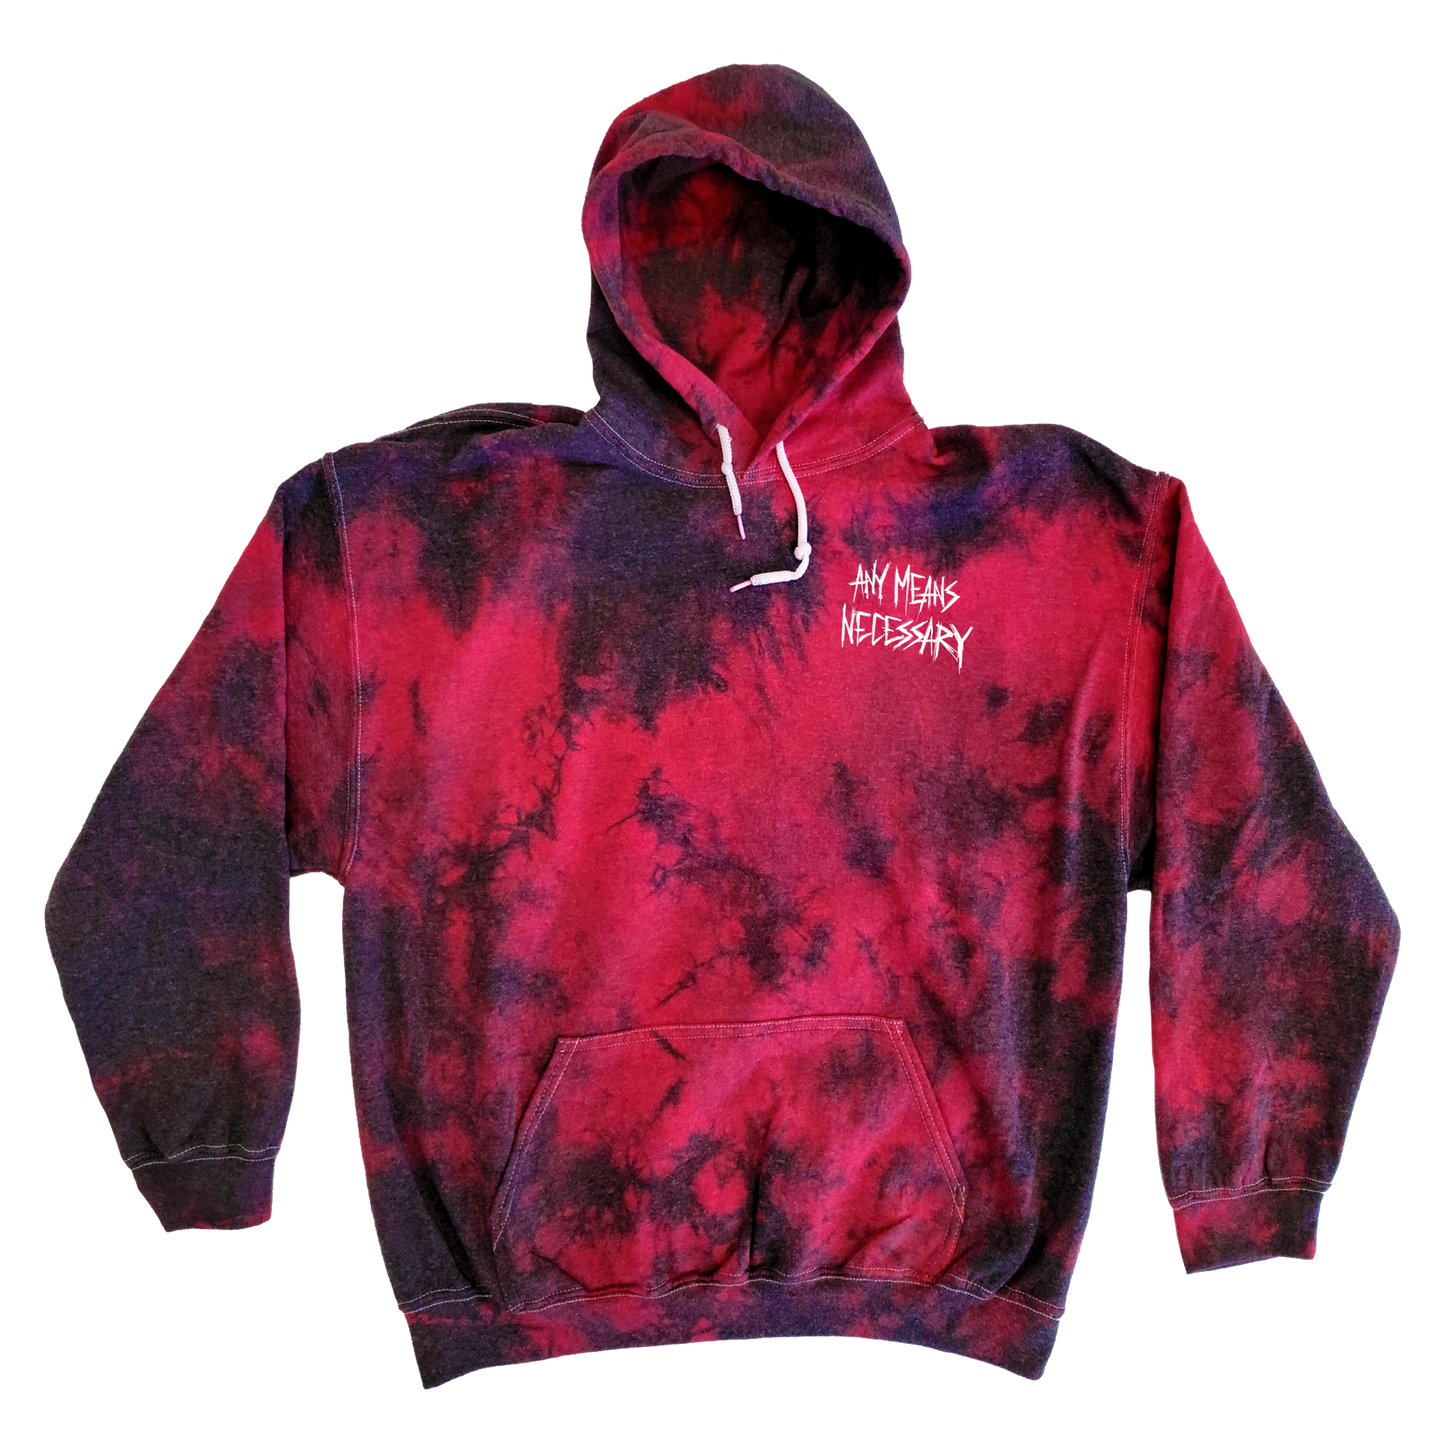 any means necessary shawn coss let the weak burn plague doctor pullover hoodie red and black tie dye